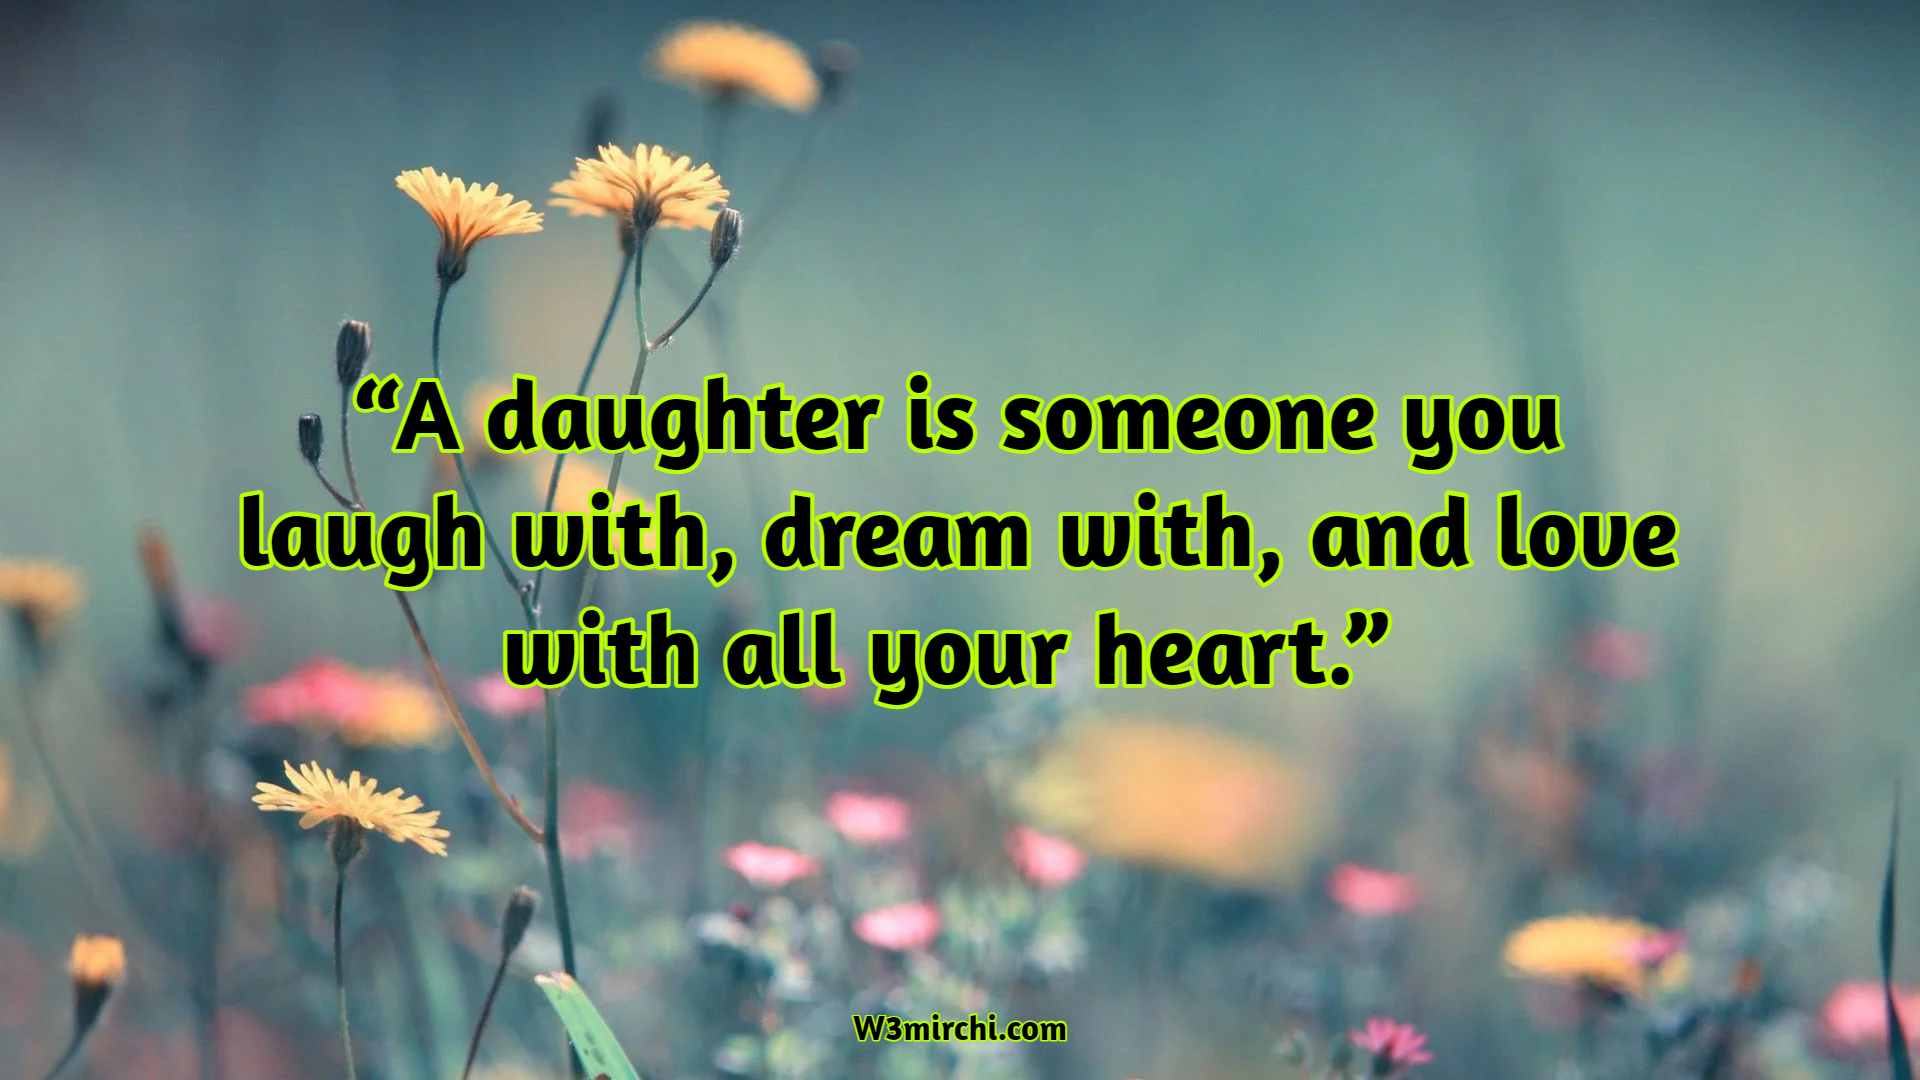 Quotes For Daughter